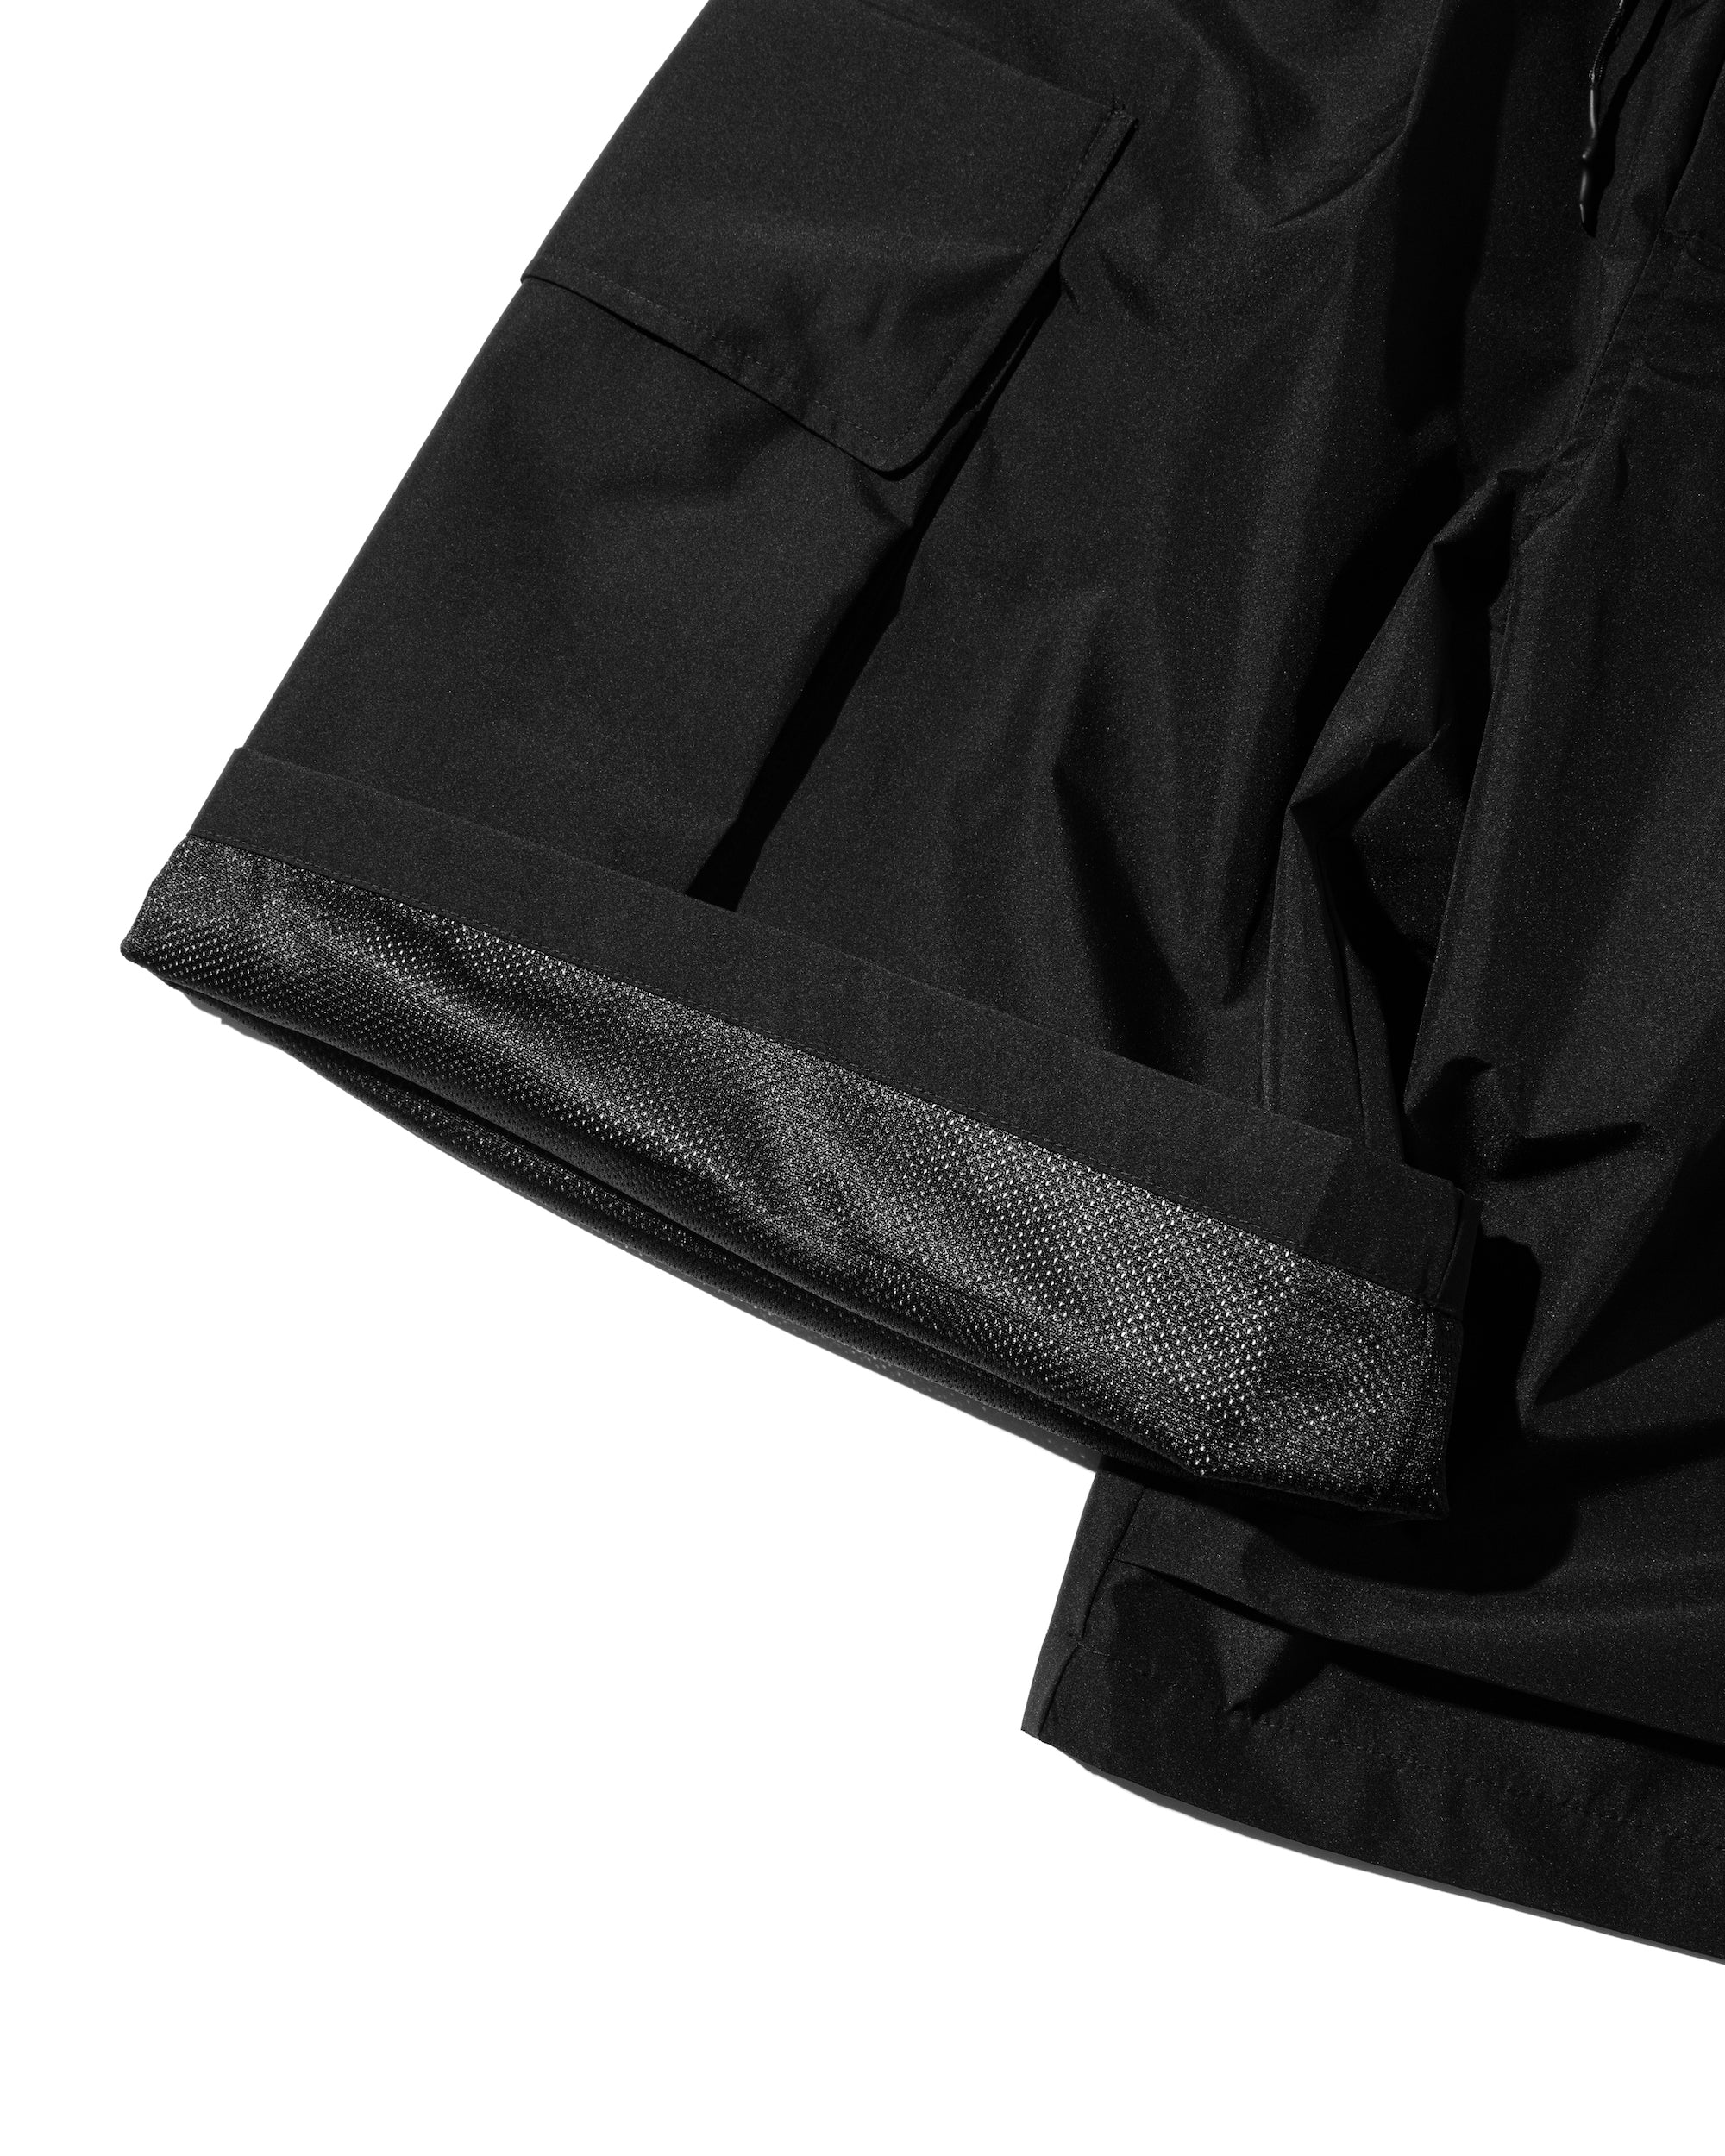 【5.1 WED 20:00- in stock】+phenix WINDSTOPPER® by GORE-TEX LABS CITY MILITARY HALF PANTS